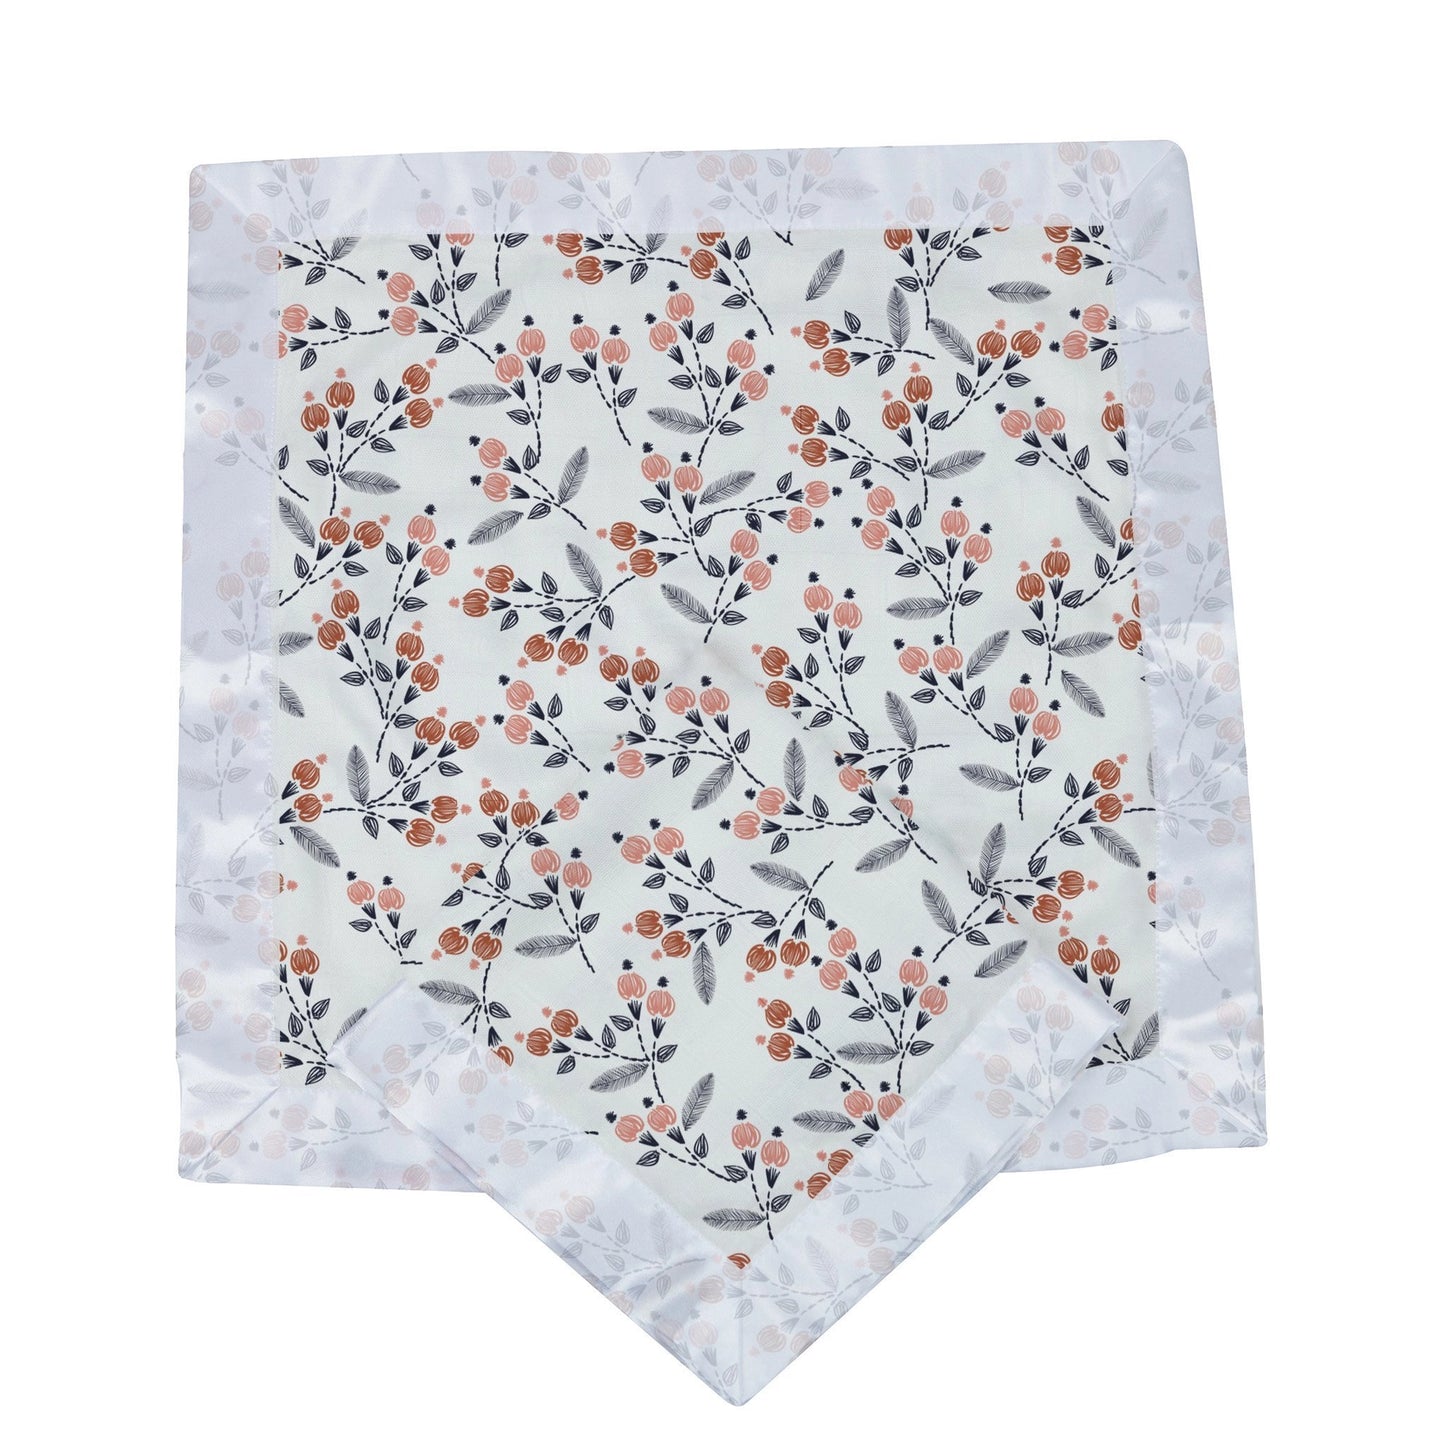 Dahlia Floral Bamboo Muslin Security Baby Blankie by Newcastle